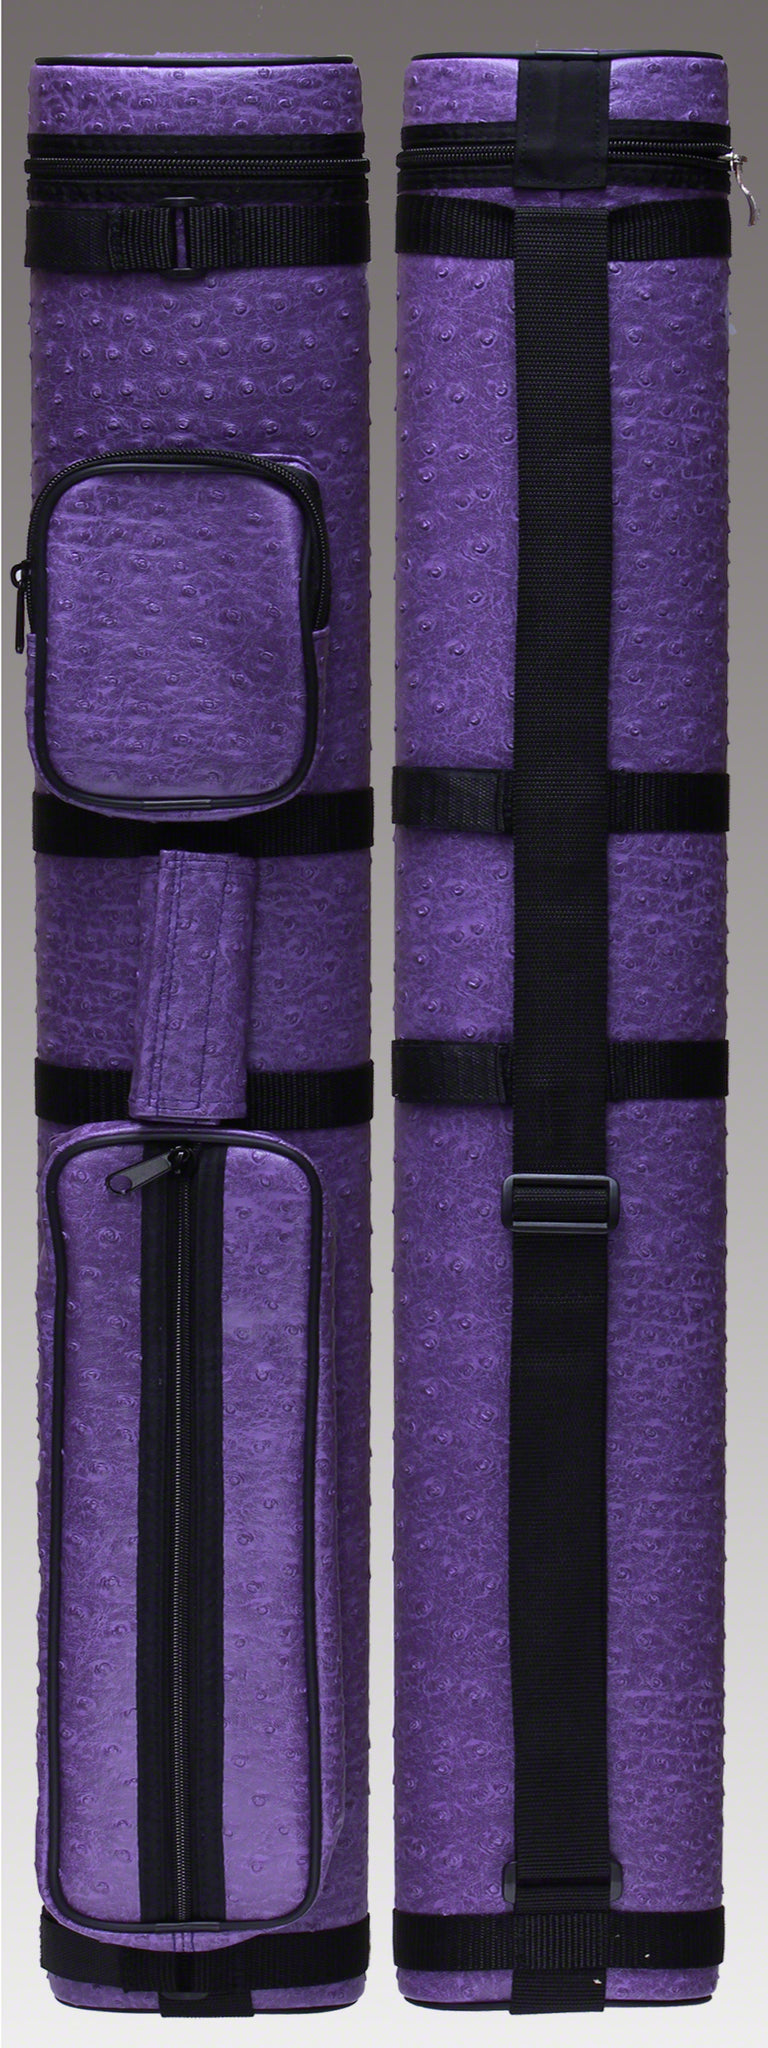 Pro Series Traditional Purple 2x2 Pool Cue Case